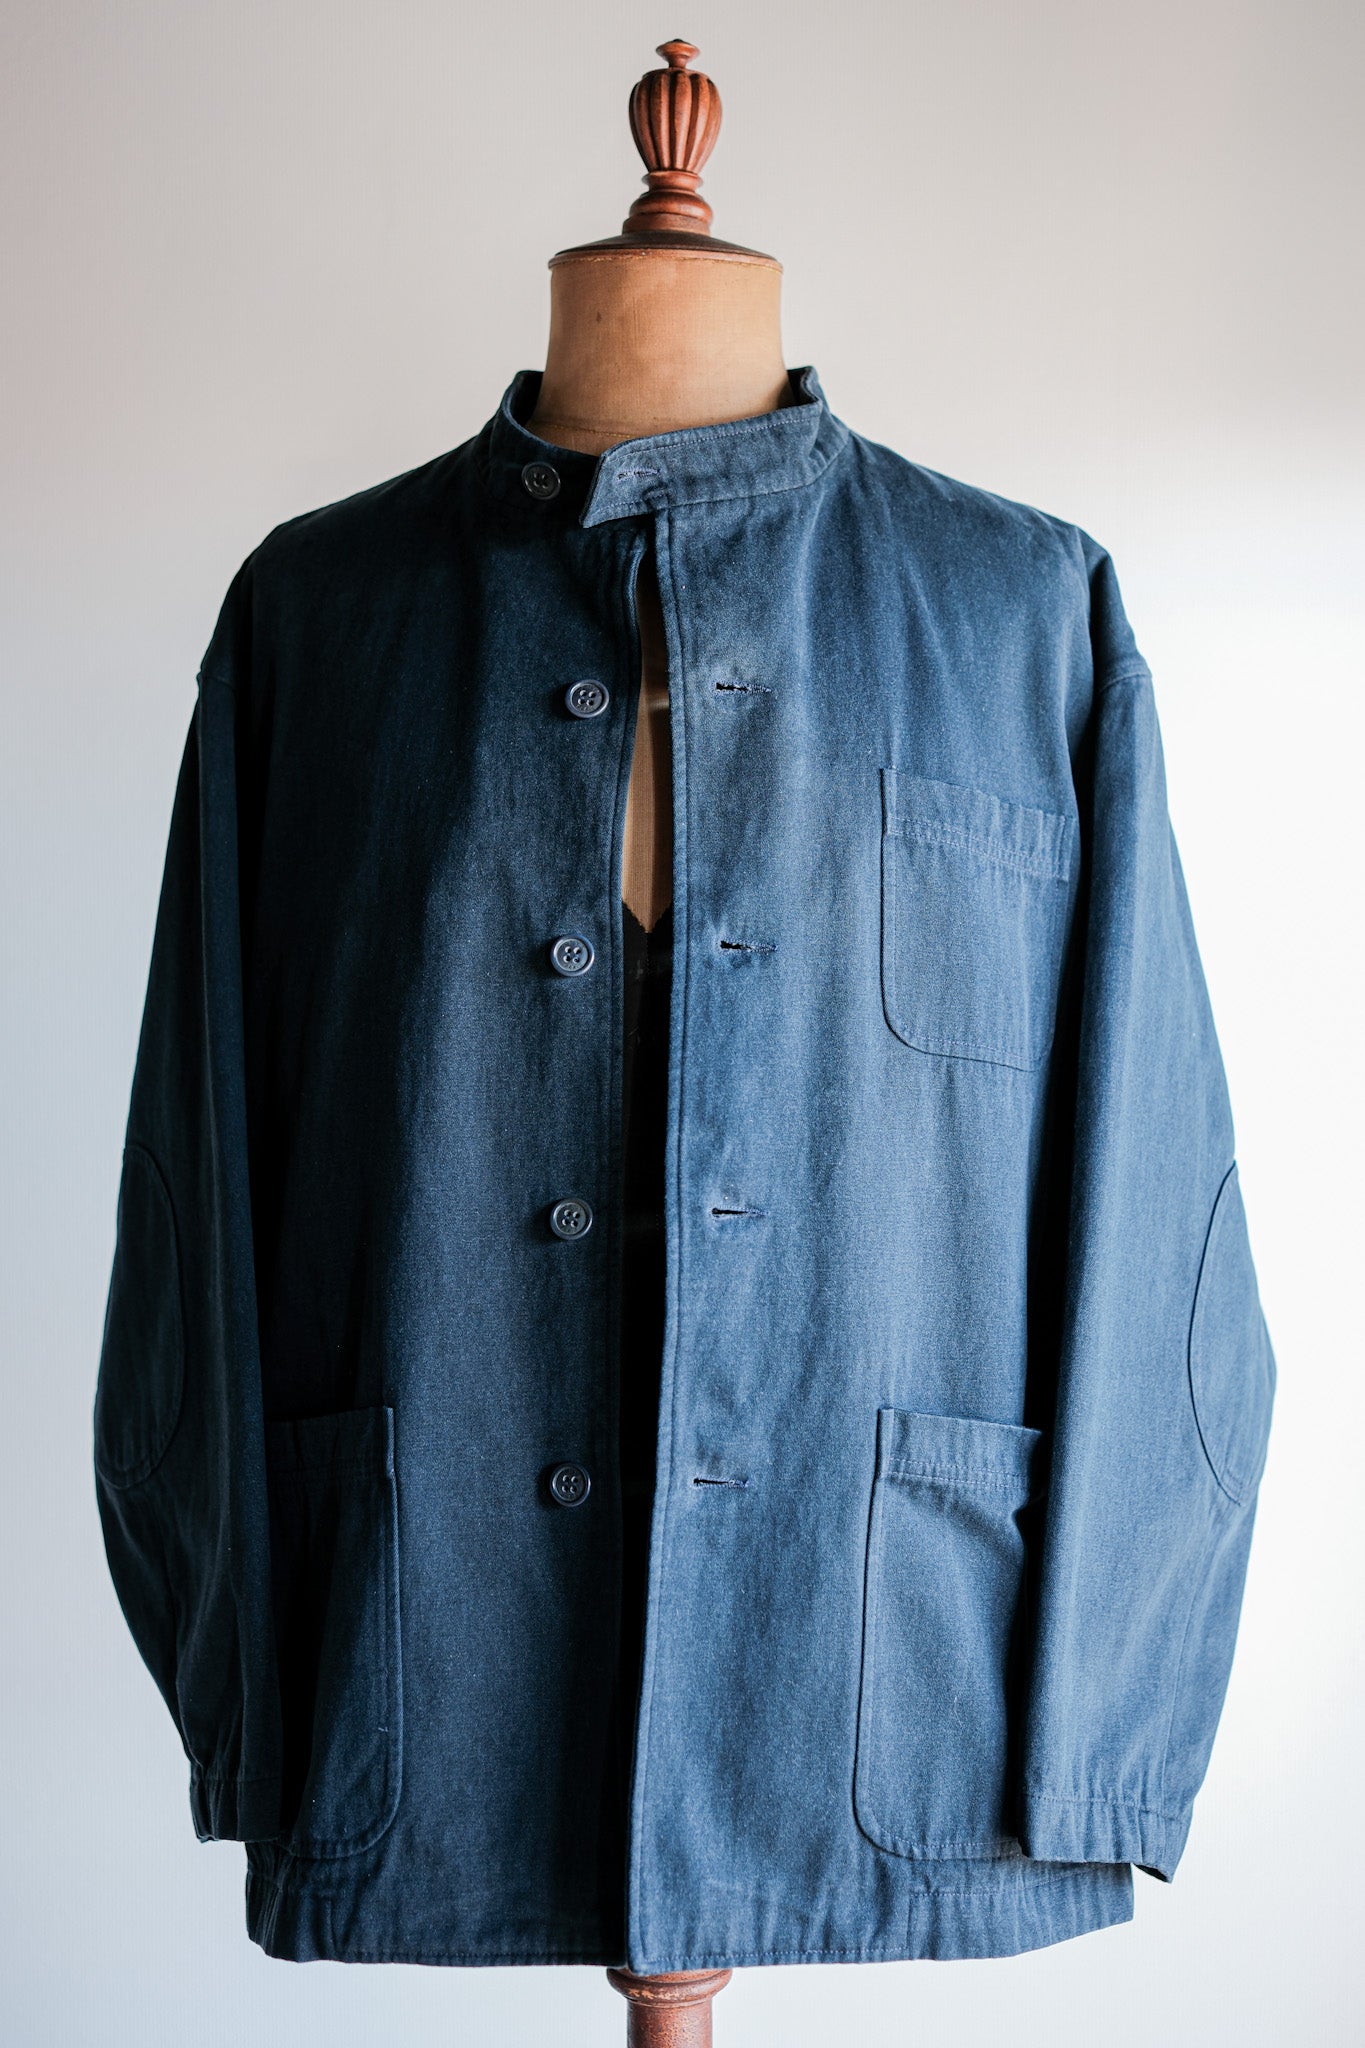 【~00's】Old ARNYS PARIS Forestiere Jacket